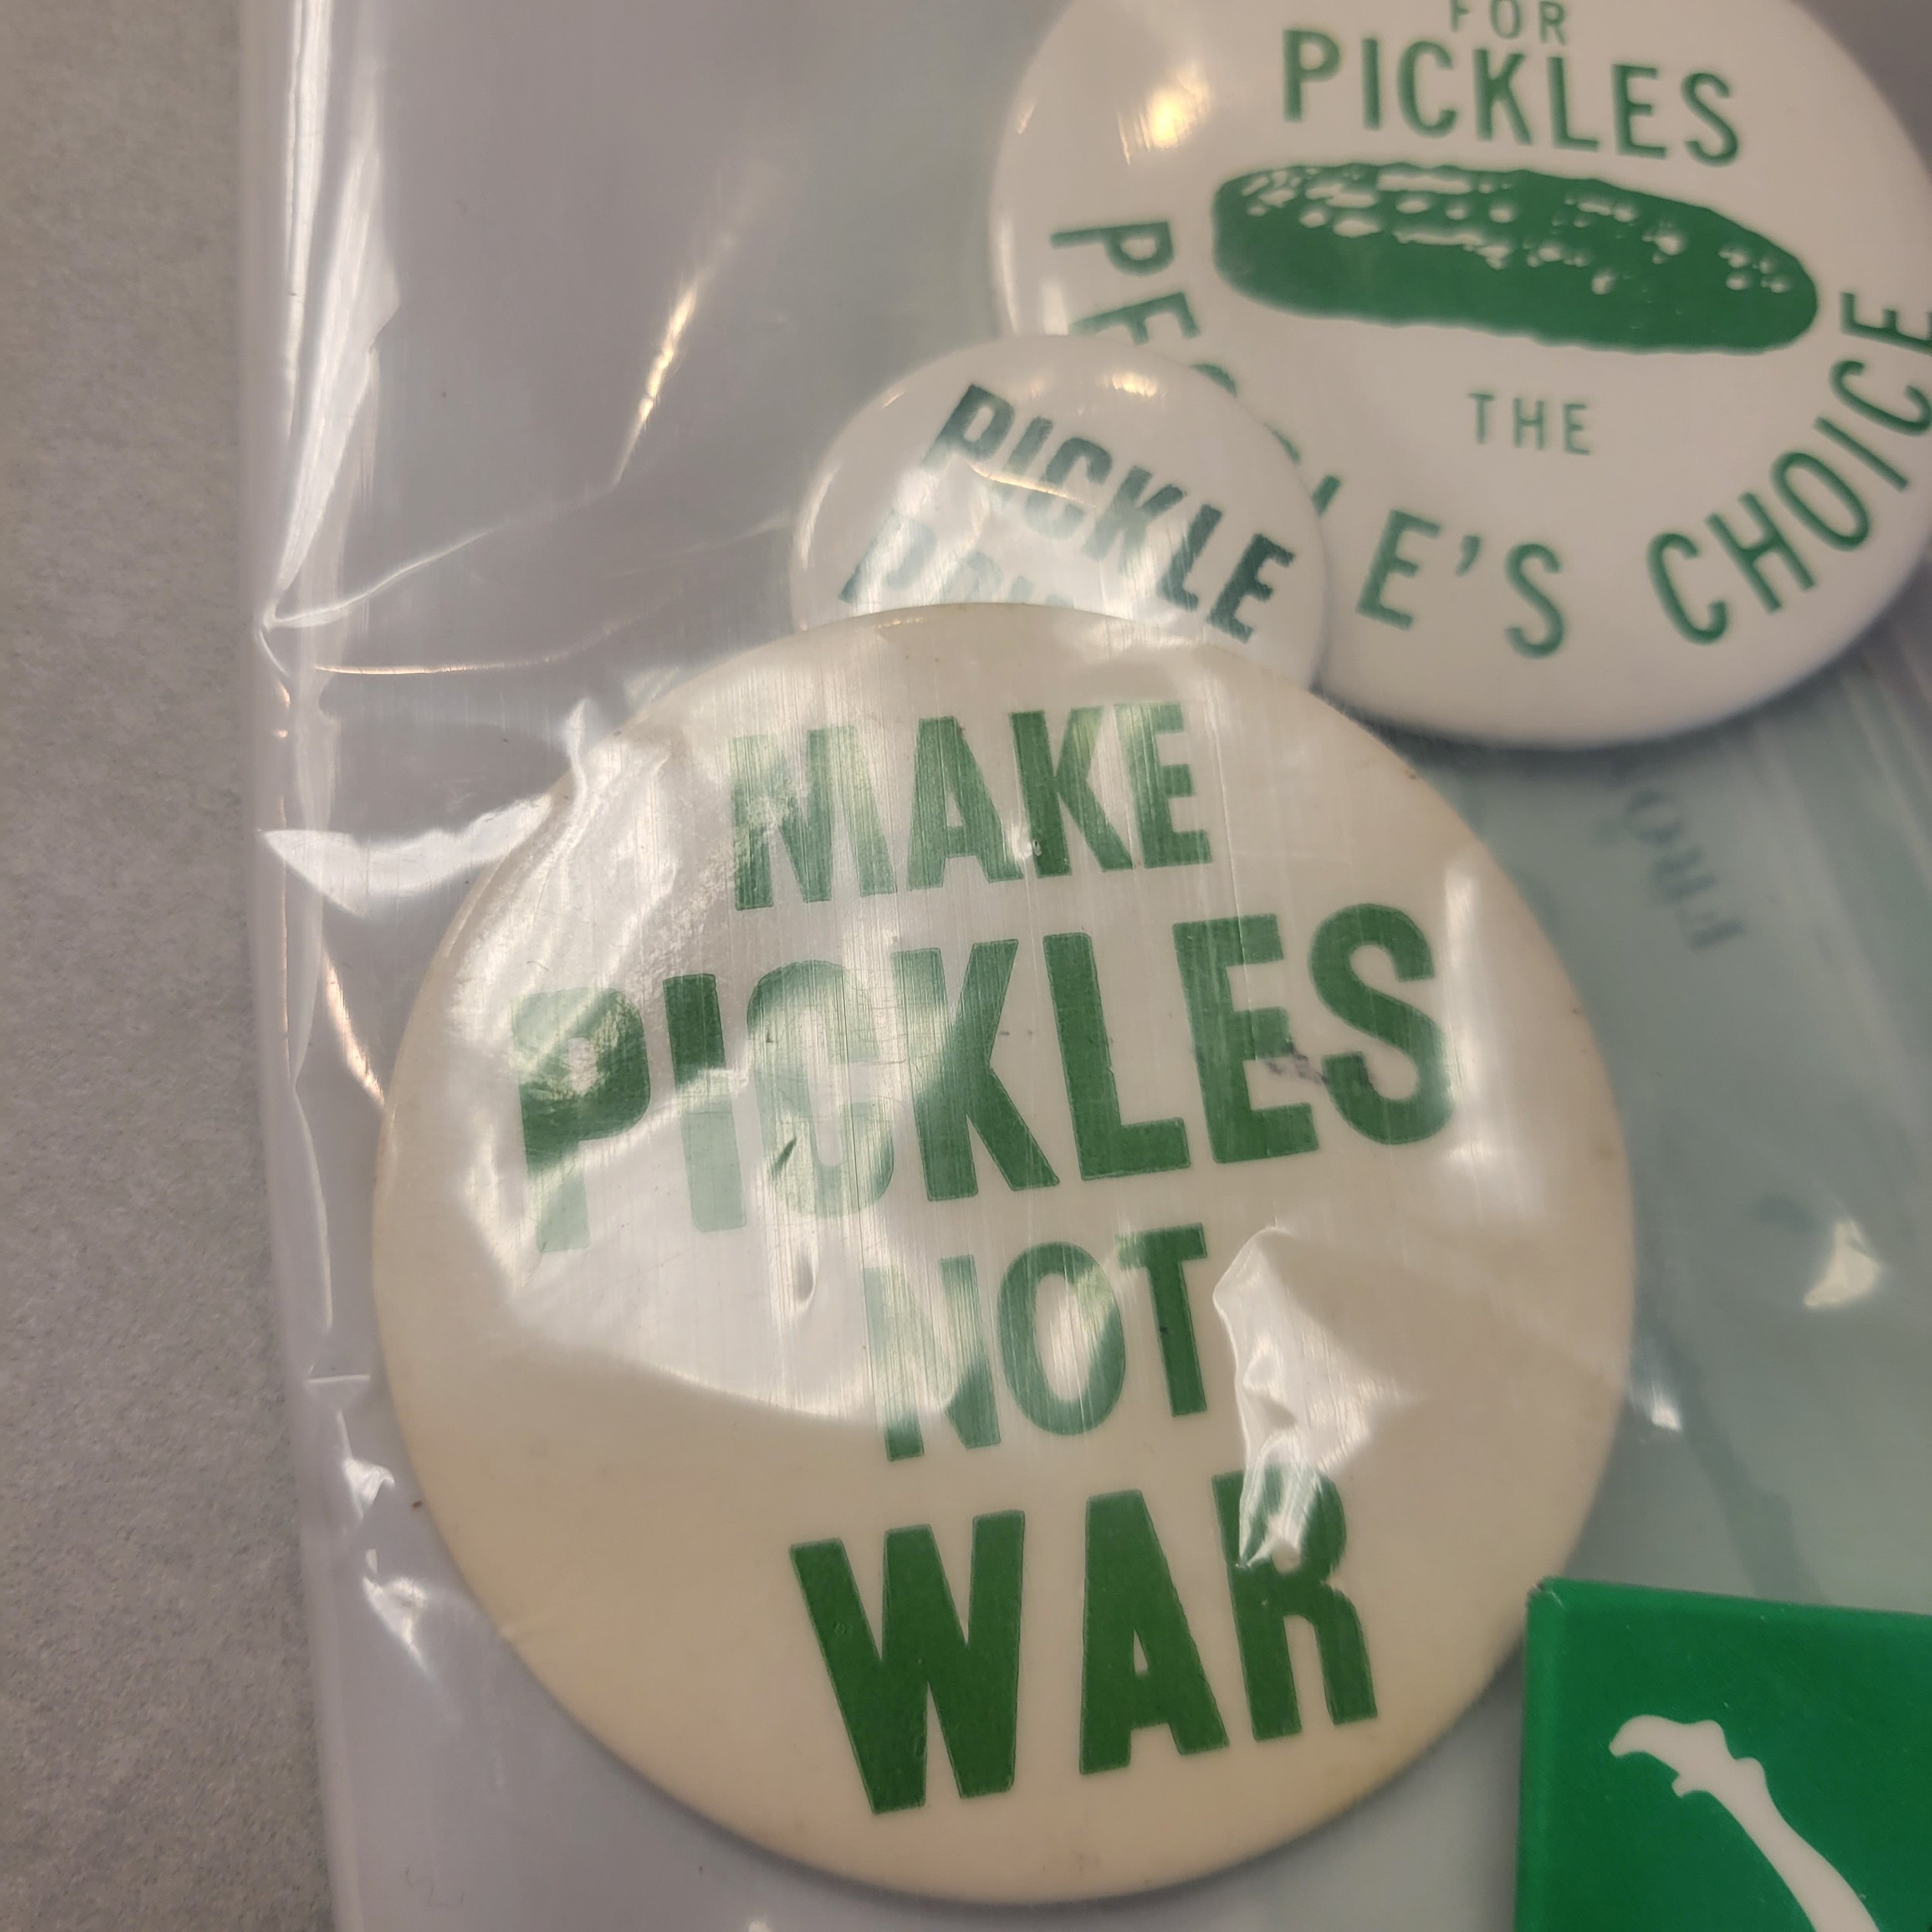 Pickle Buttons $10/one button